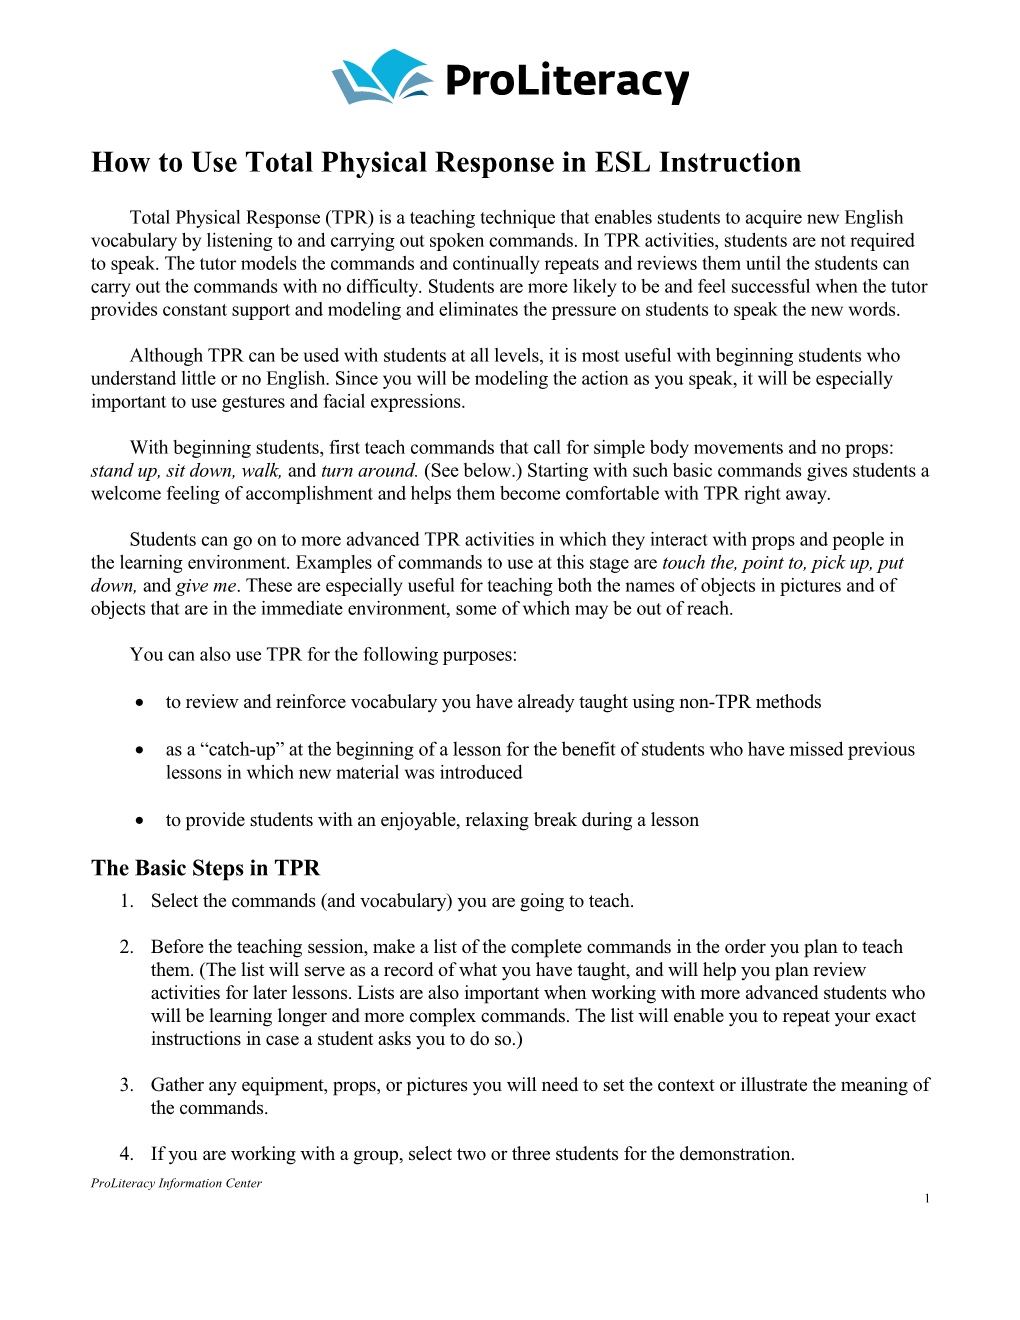 How to Use Total Physical Response in ESL Instruction